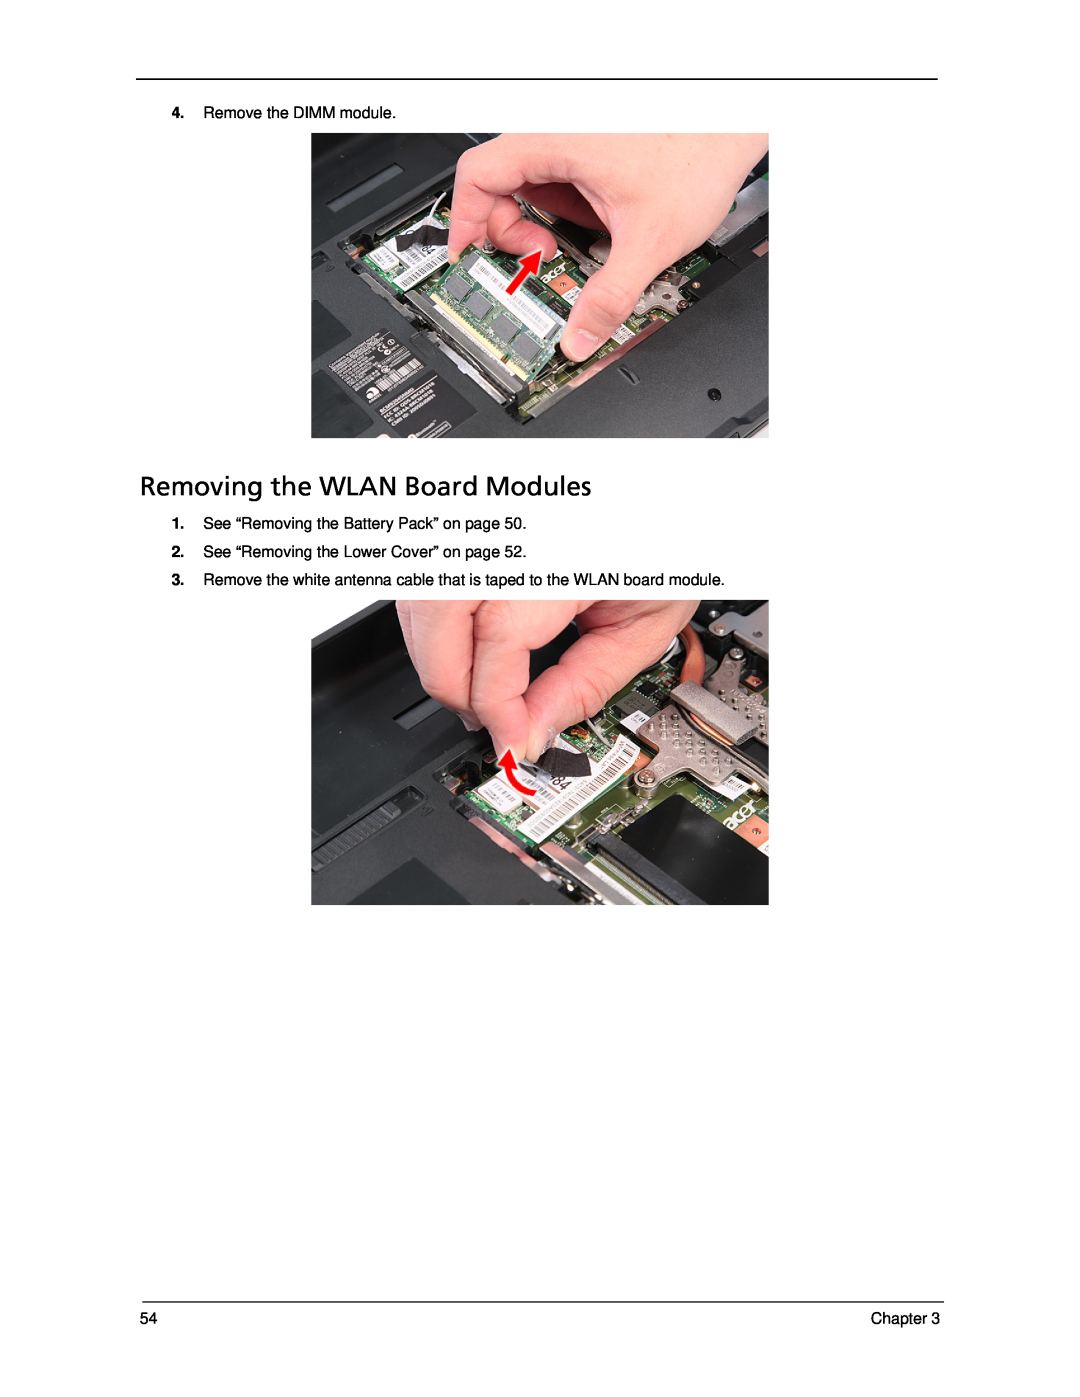 Acer 5330 manual Removing the WLAN Board Modules, Remove the DIMM module, See “Removing the Battery Pack” on page 